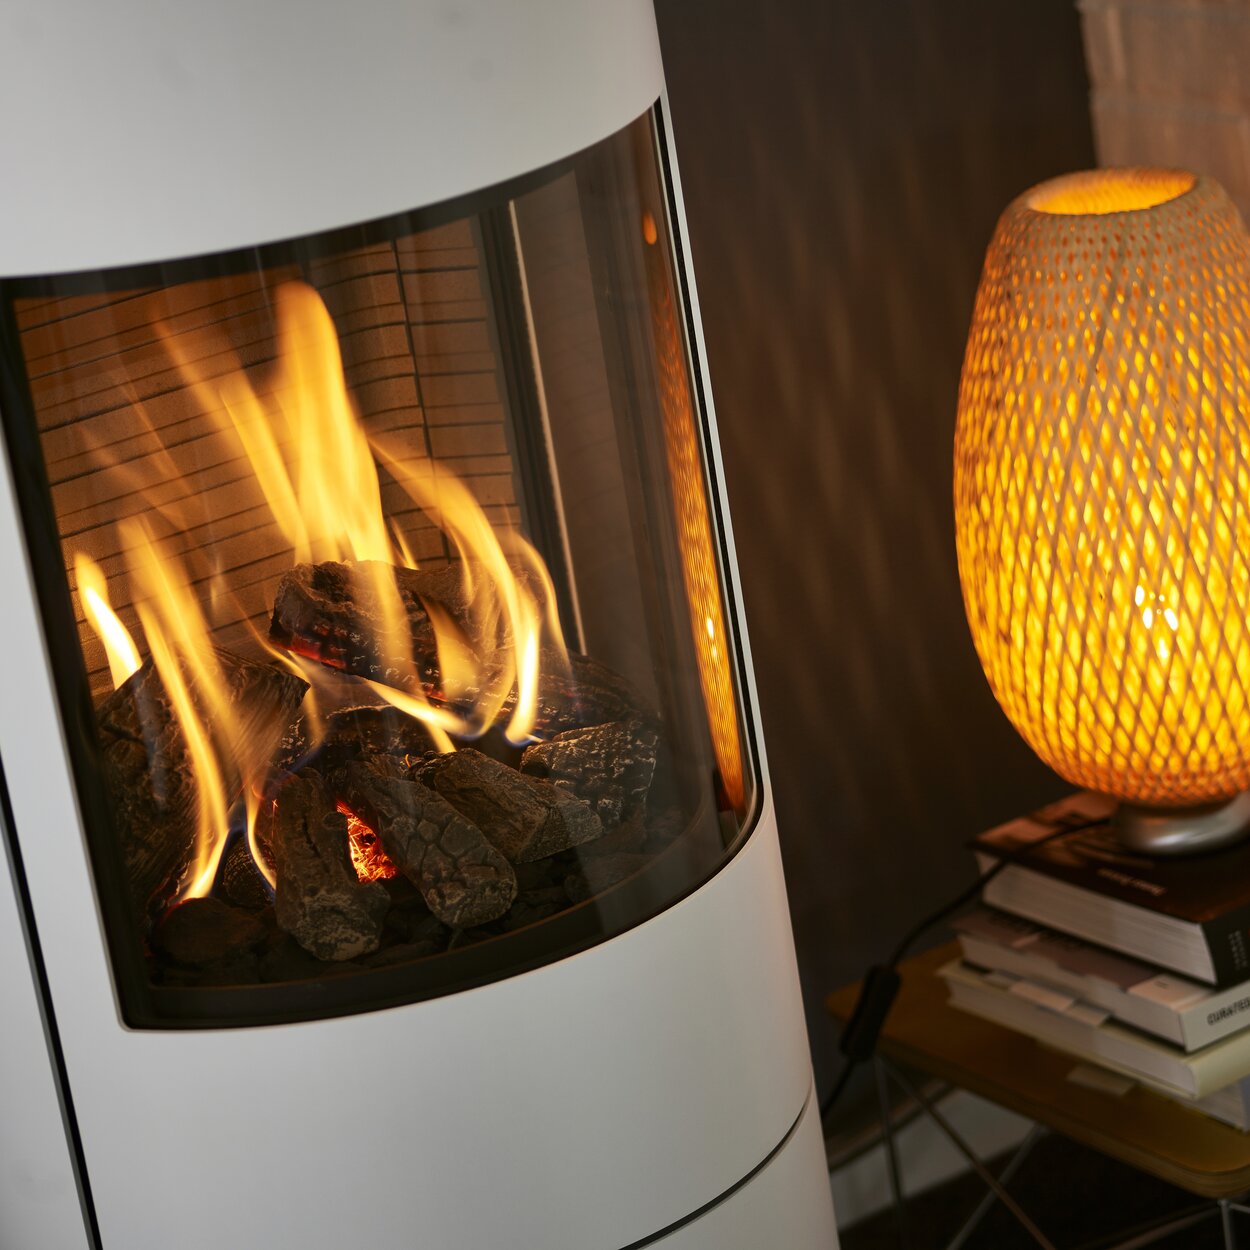 Firebox of the VIVA L gas stove in white with steel door and side windows and pleasantly burning gas flame